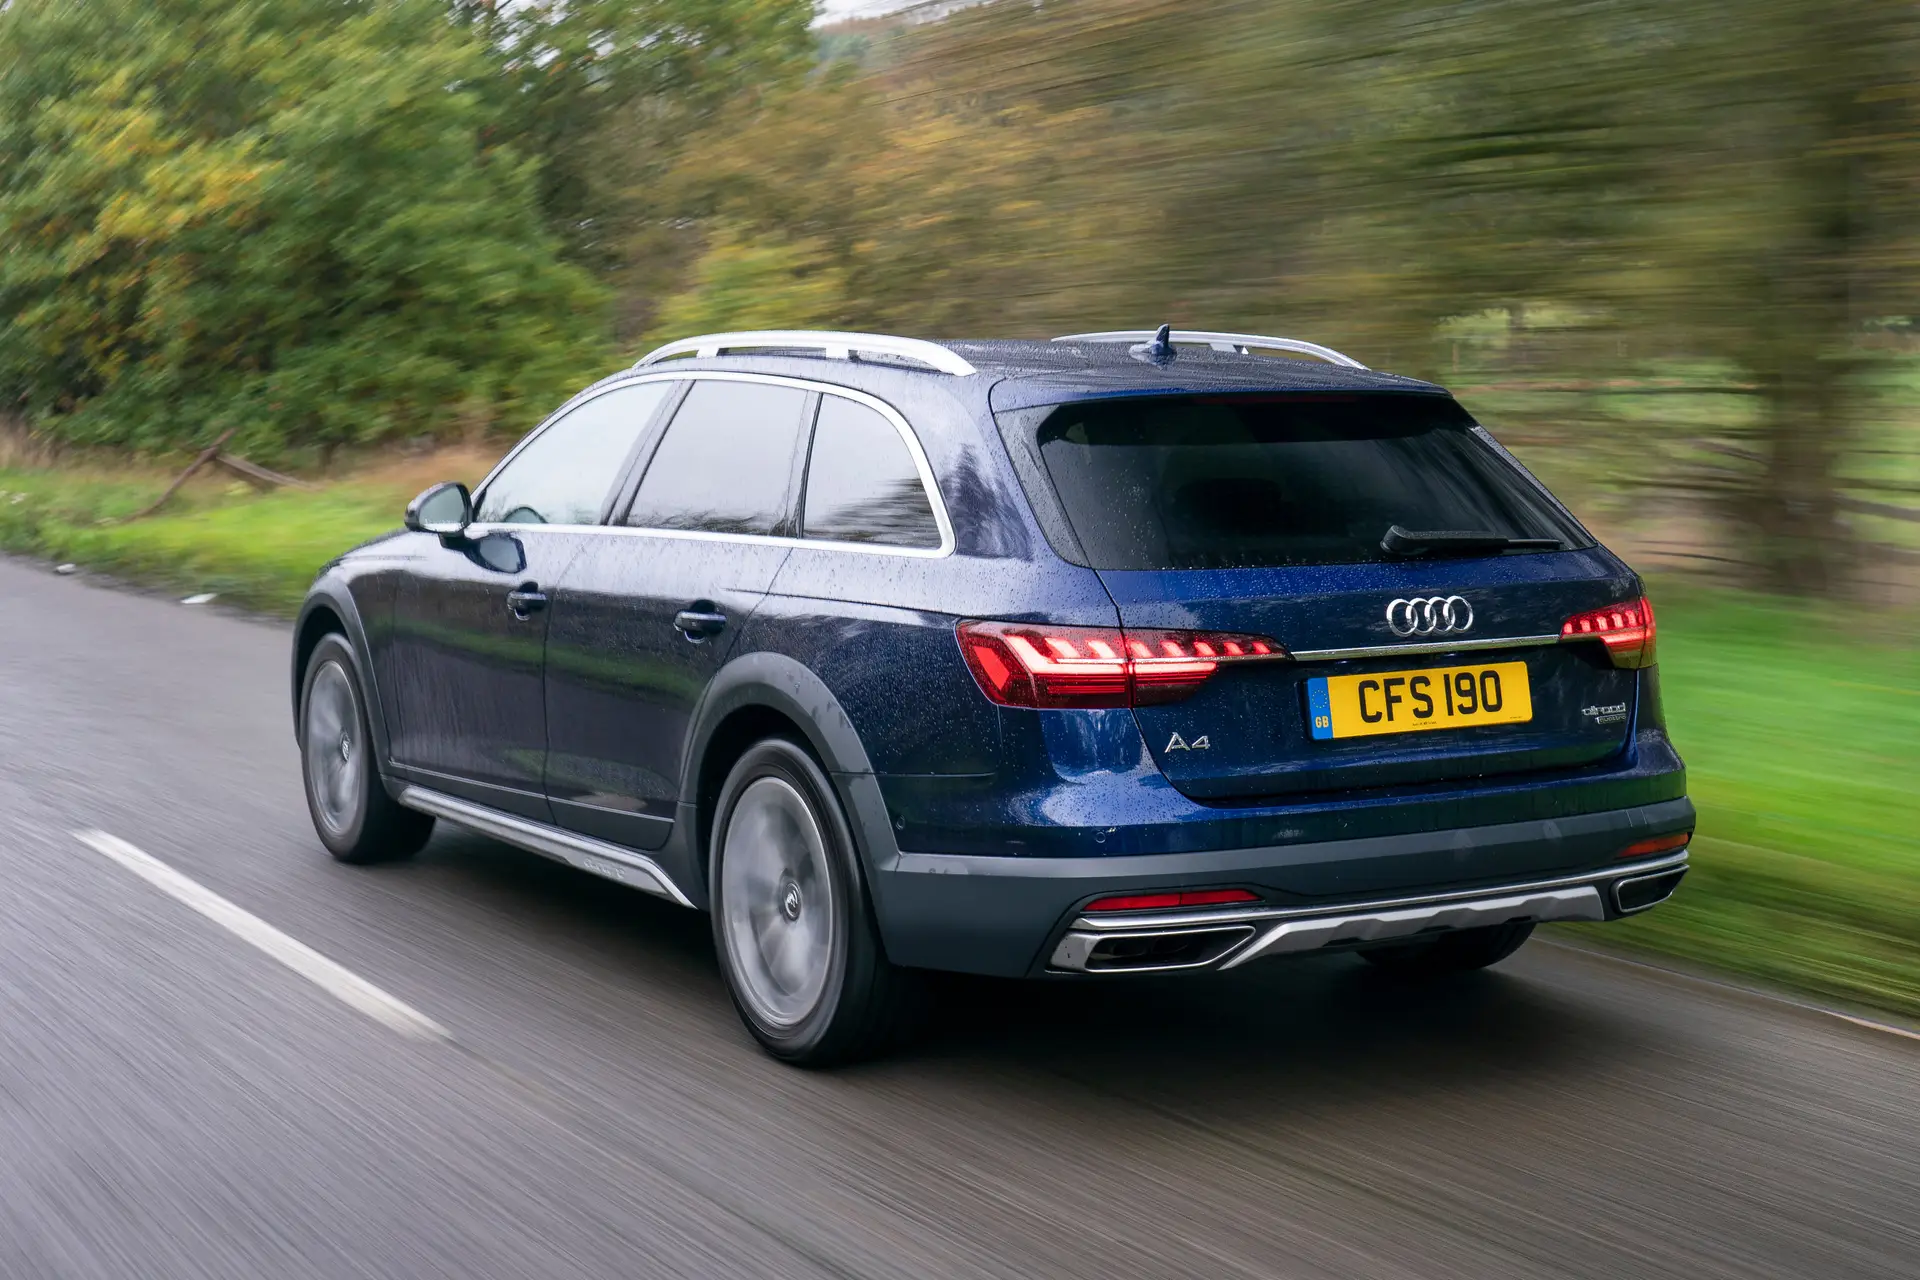 Audi A4 Allroad Review 2023: exterior rear three quarter image of the Audi A4 Allroad on the road